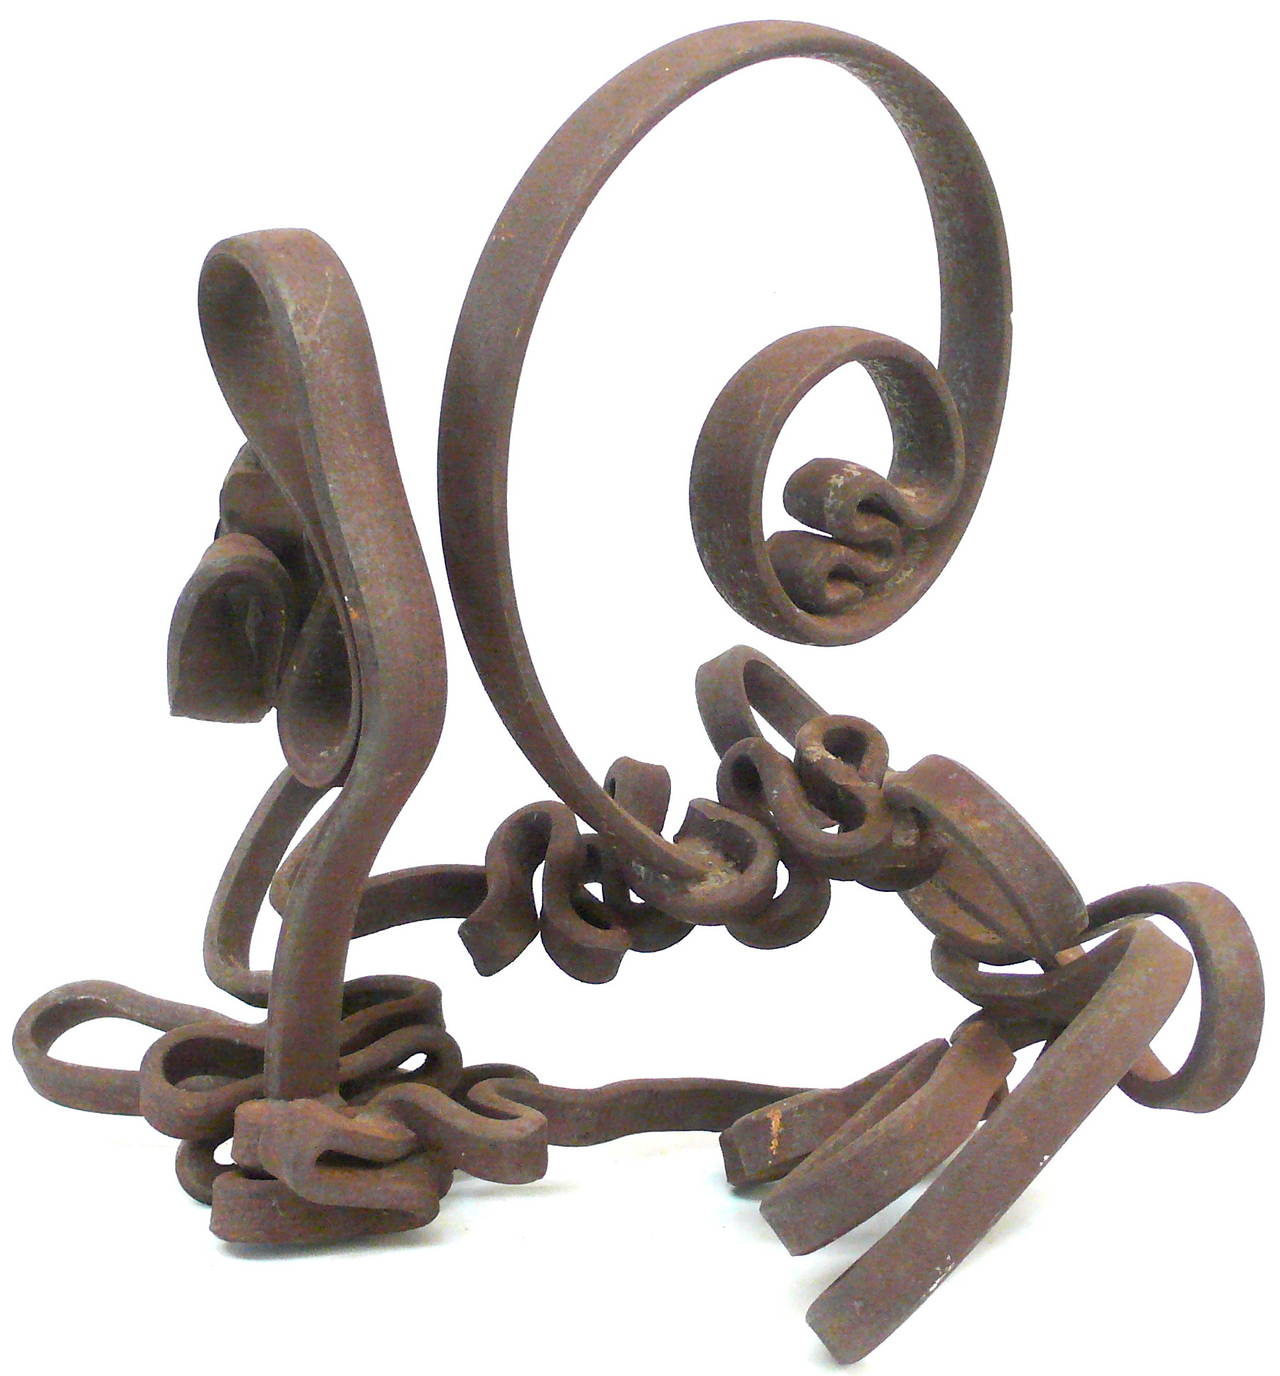 A wonderfully playful wrought-iron sculpture of a lively, looping and squiggling 